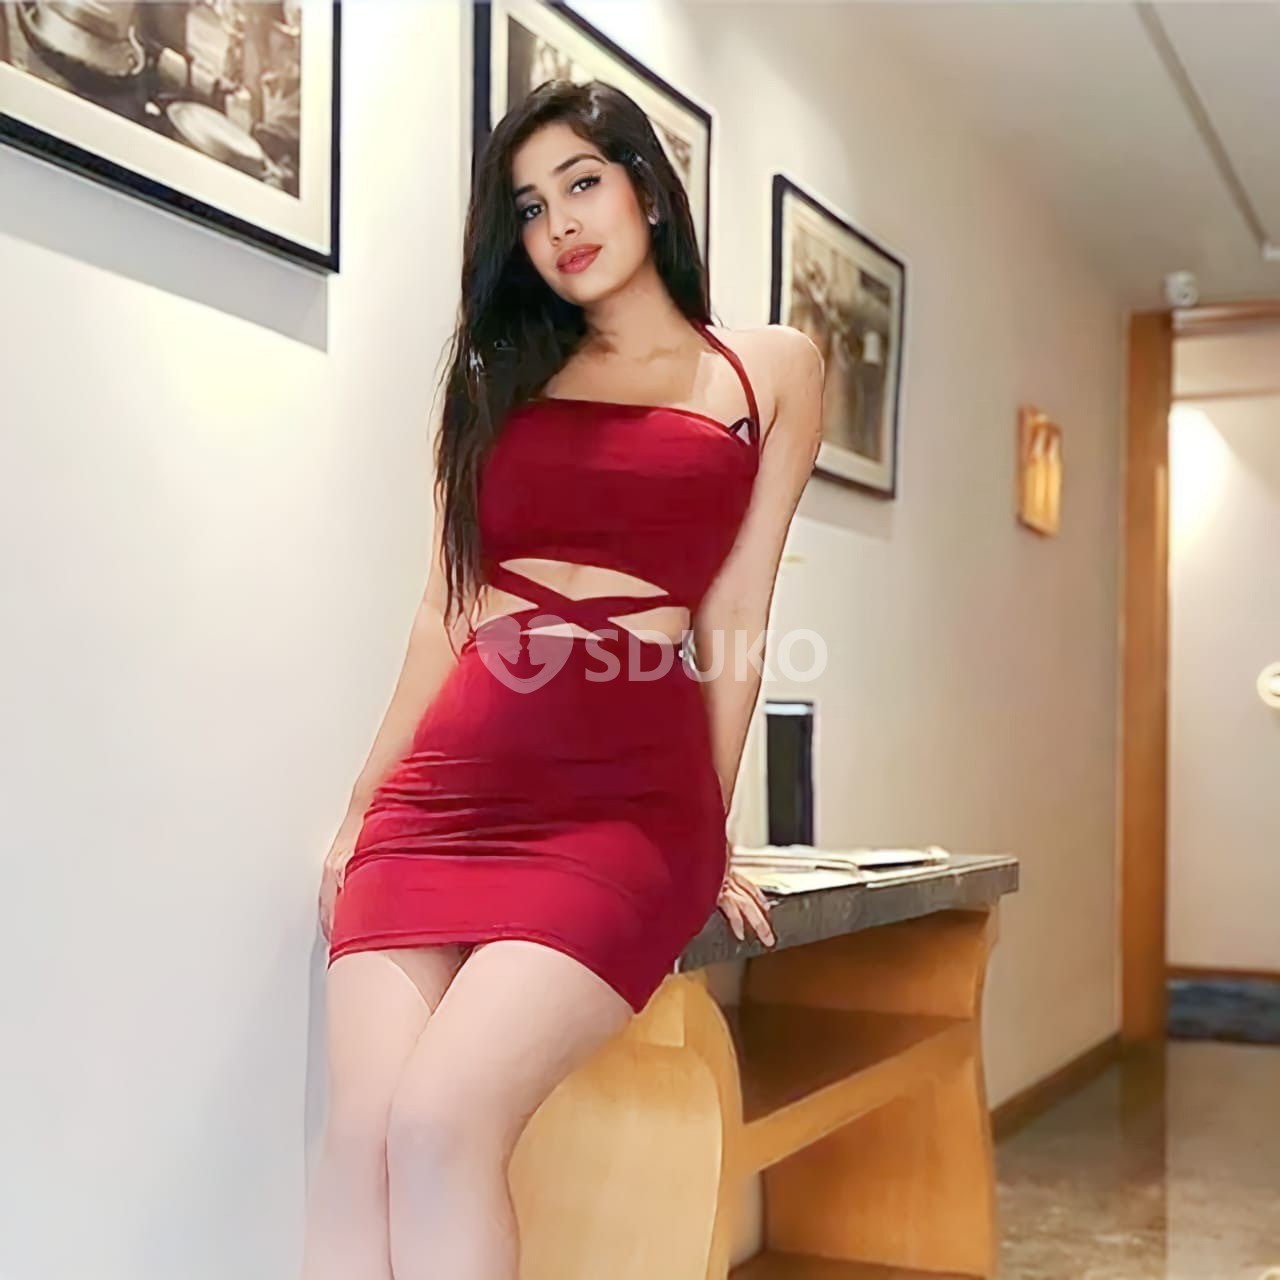 Chandni chowk 🆑 BEST CALL GIRL INDEPENDENT ESCORT SERVICE IN LOW BUDGET